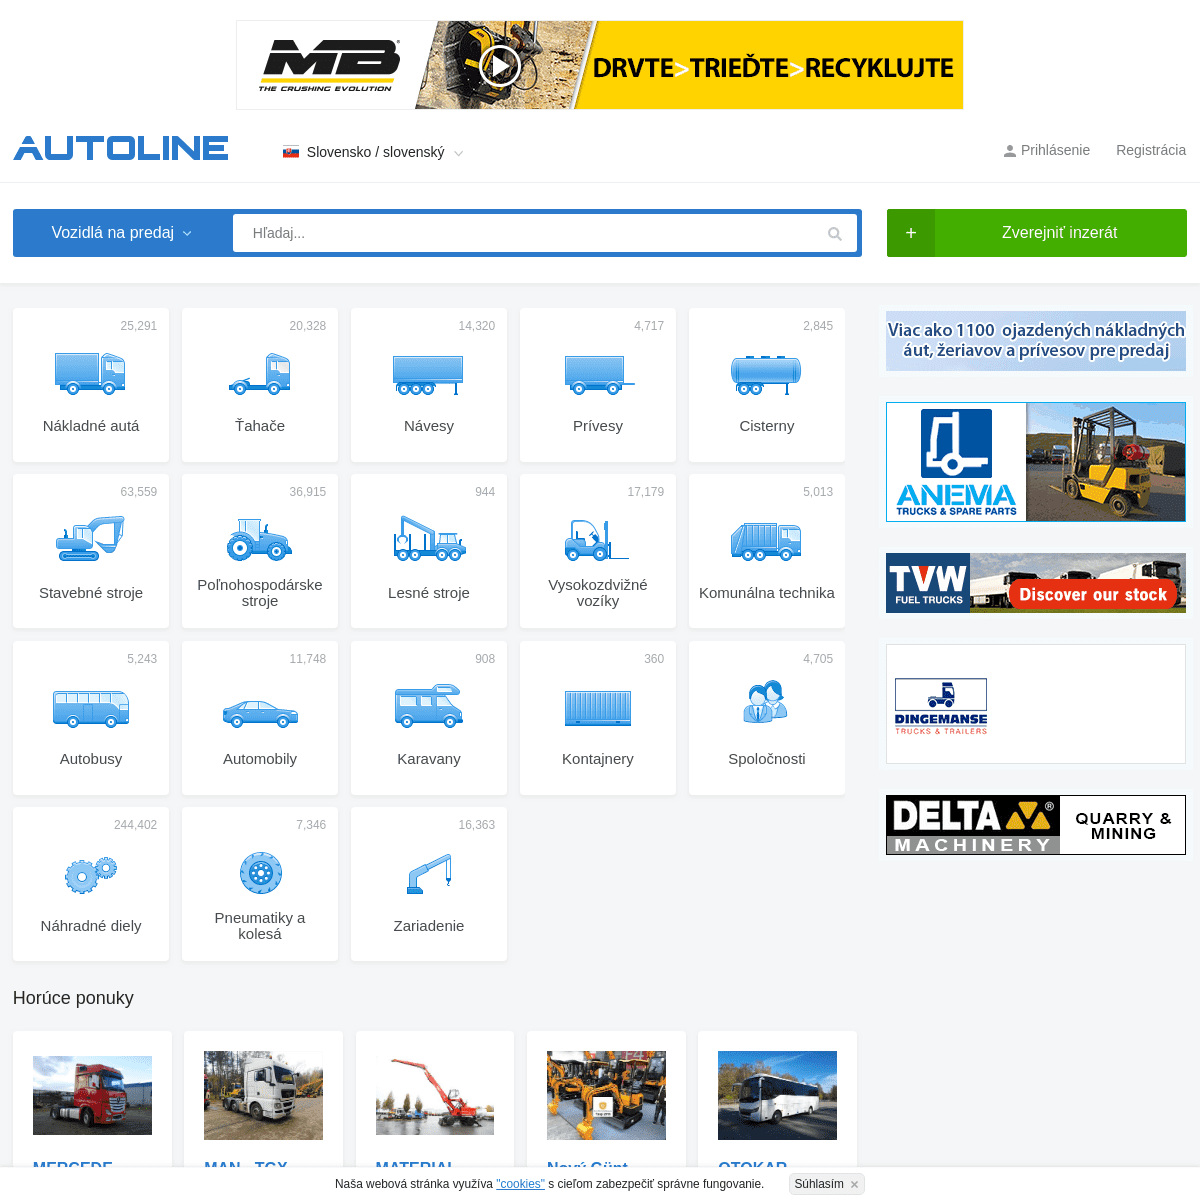 A complete backup of autoline.sk